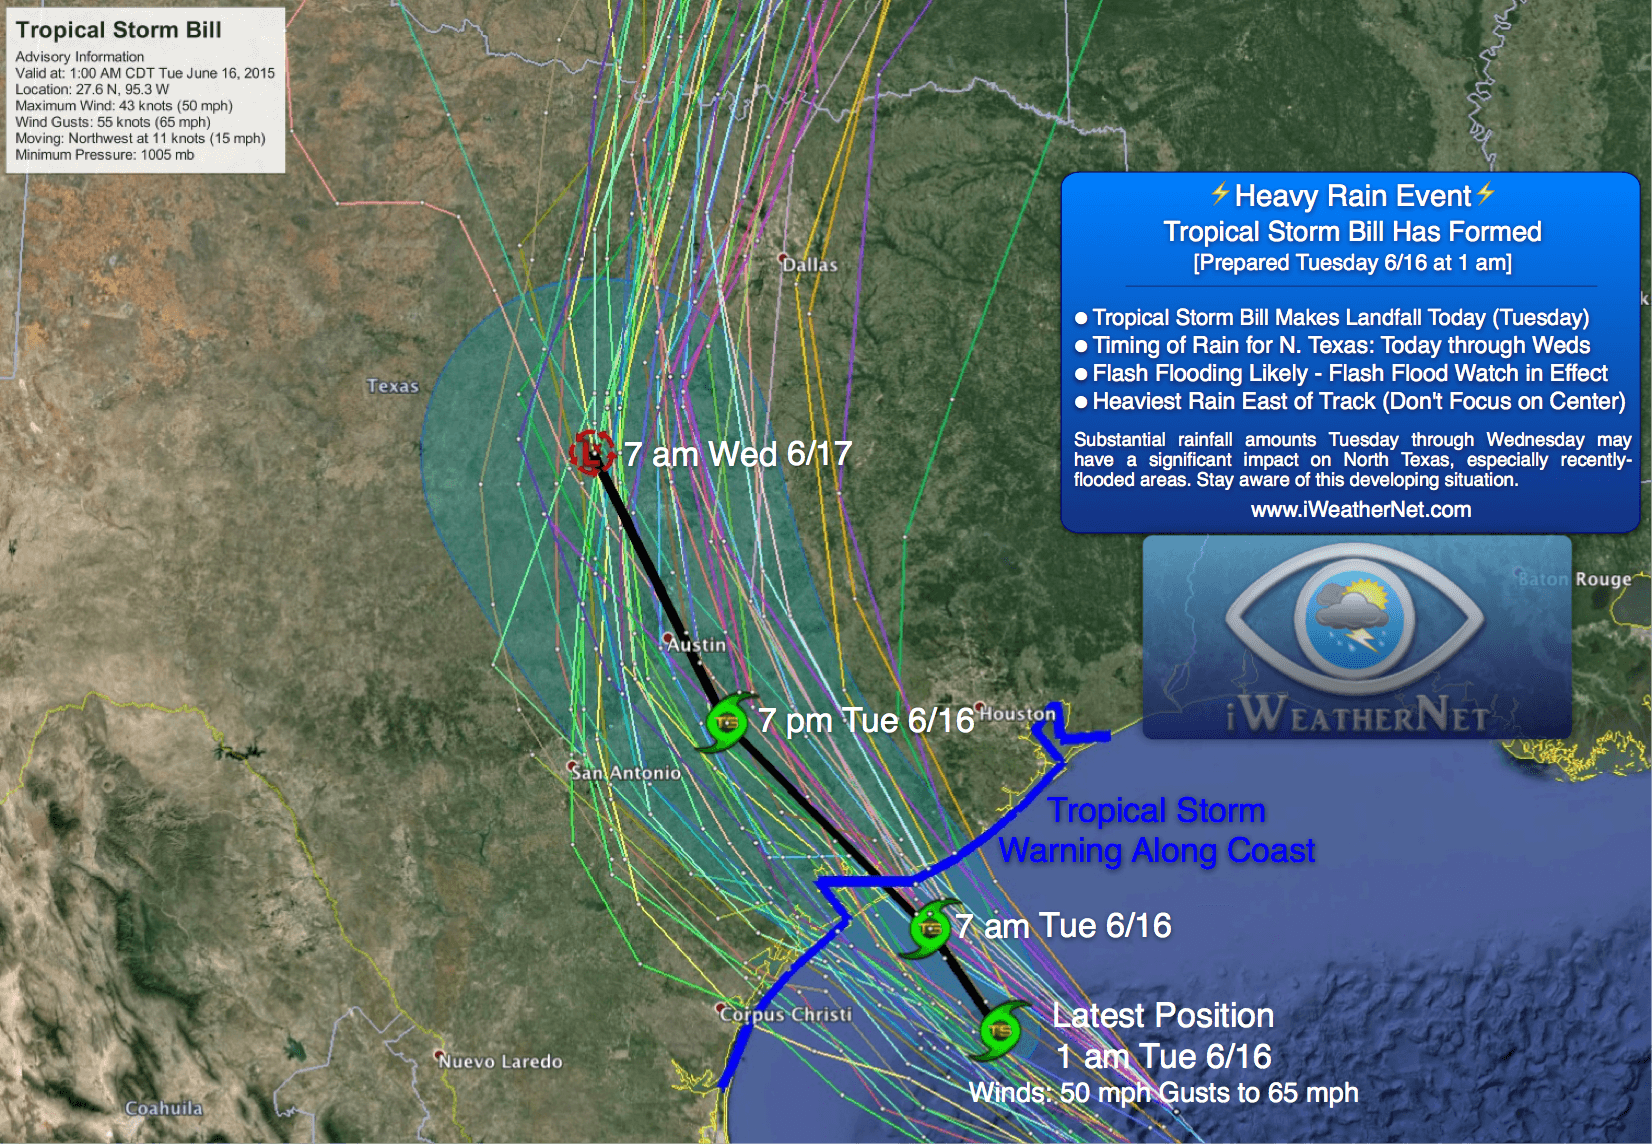 DFW: Gulf low may form, Tropical Storm Bill possible, heavy rain event expected ...1652 x 1144